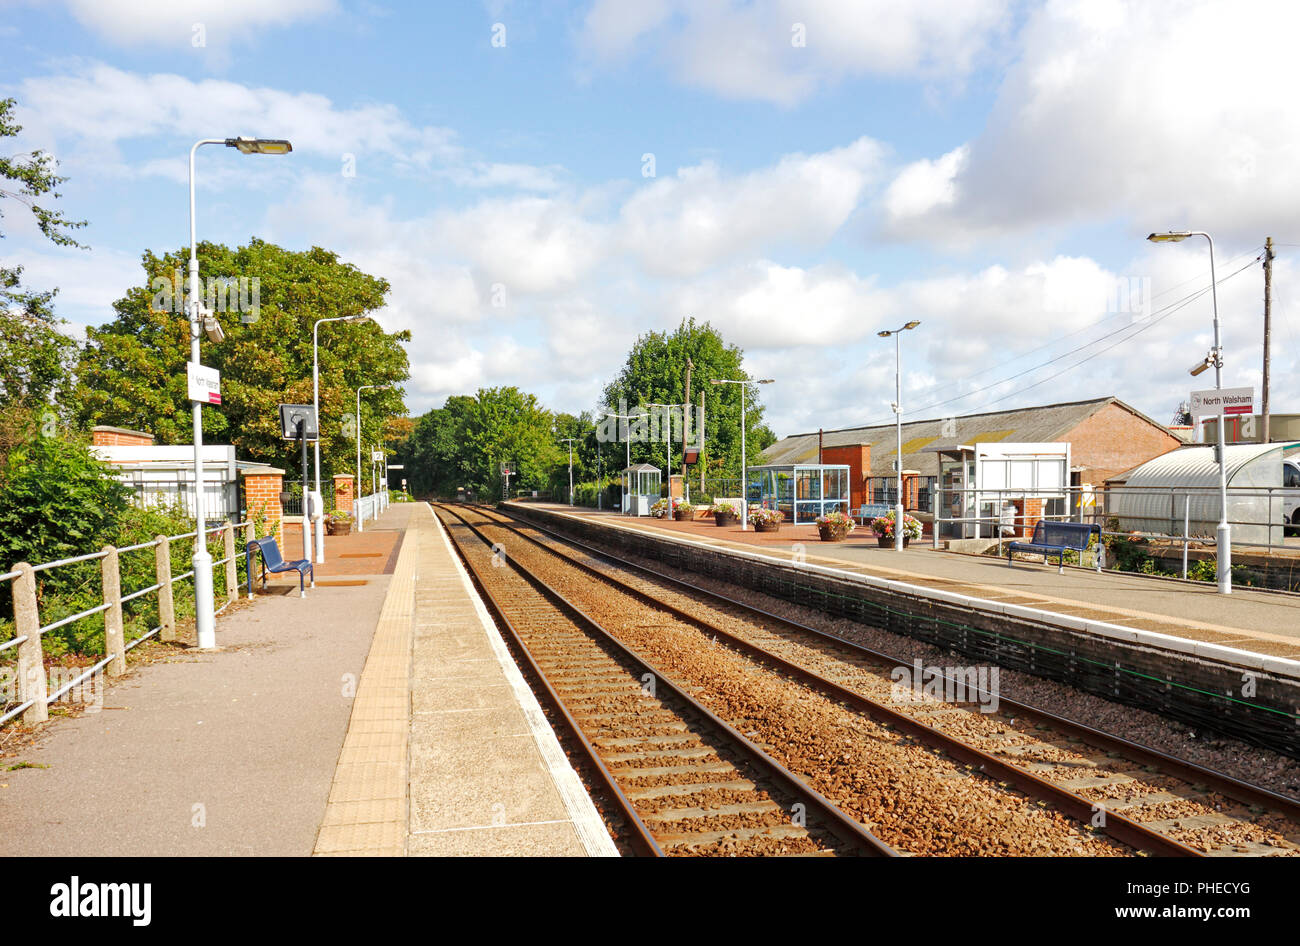 A view of the platforms and passenger waiting areas on the unmanned railway station at North Walsham, Norfolk, England, United Kingdom, Europe. Stock Photo